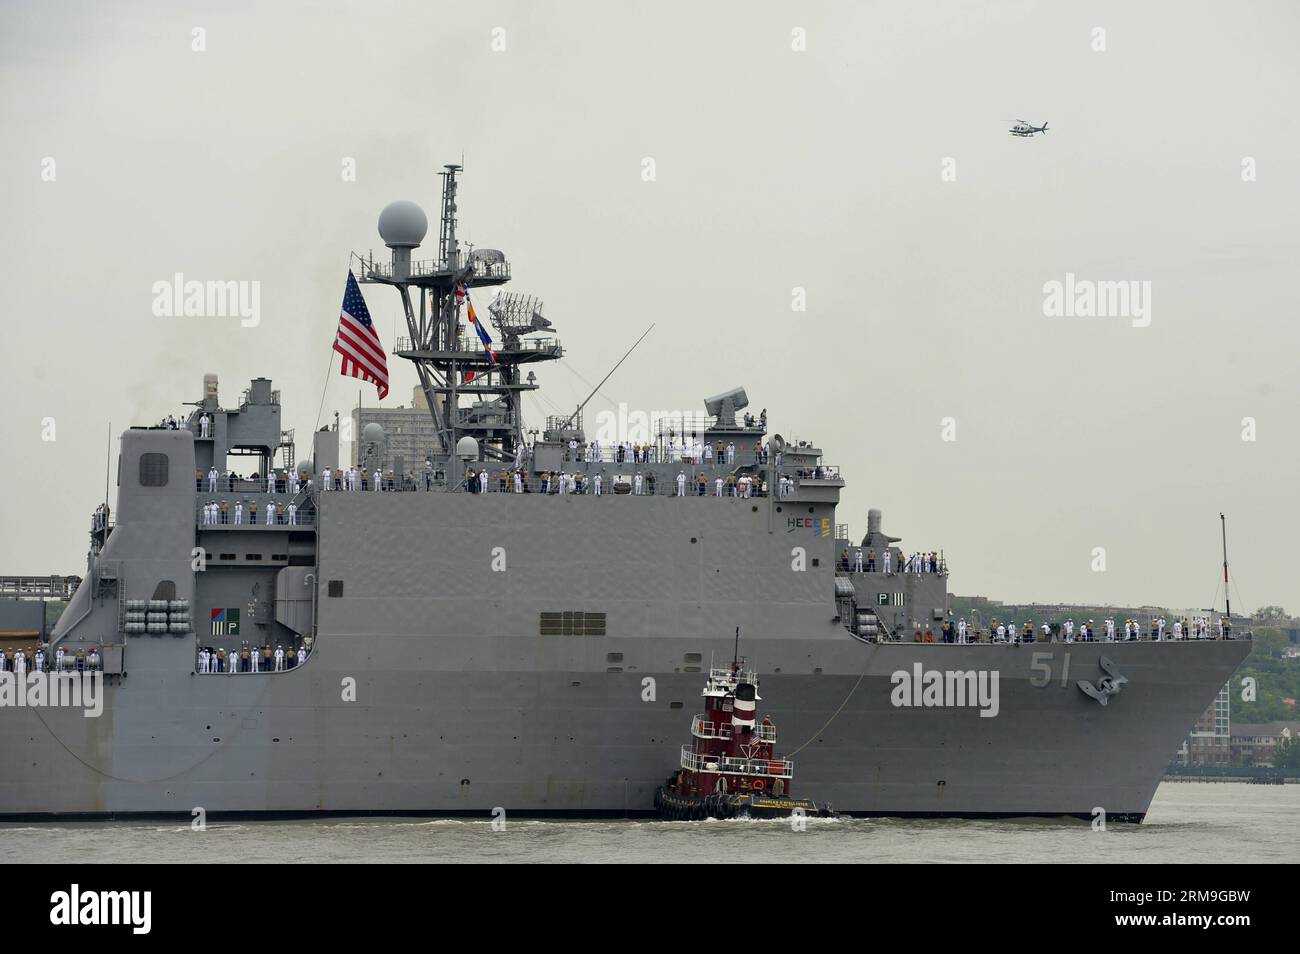 NEW YORK, (Xinhua) -- The USS Oak Hill sails up the Hudson River during the parade of fleet week, in New York, the United States, on May 21, 2014. (Xinhua/Wang Lei) US-NEW YORK-FLEET WEEK-SHIPS PARADE PUBLICATIONxNOTxINxCHN   New York XINHUA The USS Oak Hill SAILS up The Hudson River during The Parade of Fleet Week in New York The United States ON May 21 2014 XINHUA Wang Lei U.S. New York Fleet Week Ships Parade PUBLICATIONxNOTxINxCHN Stock Photo